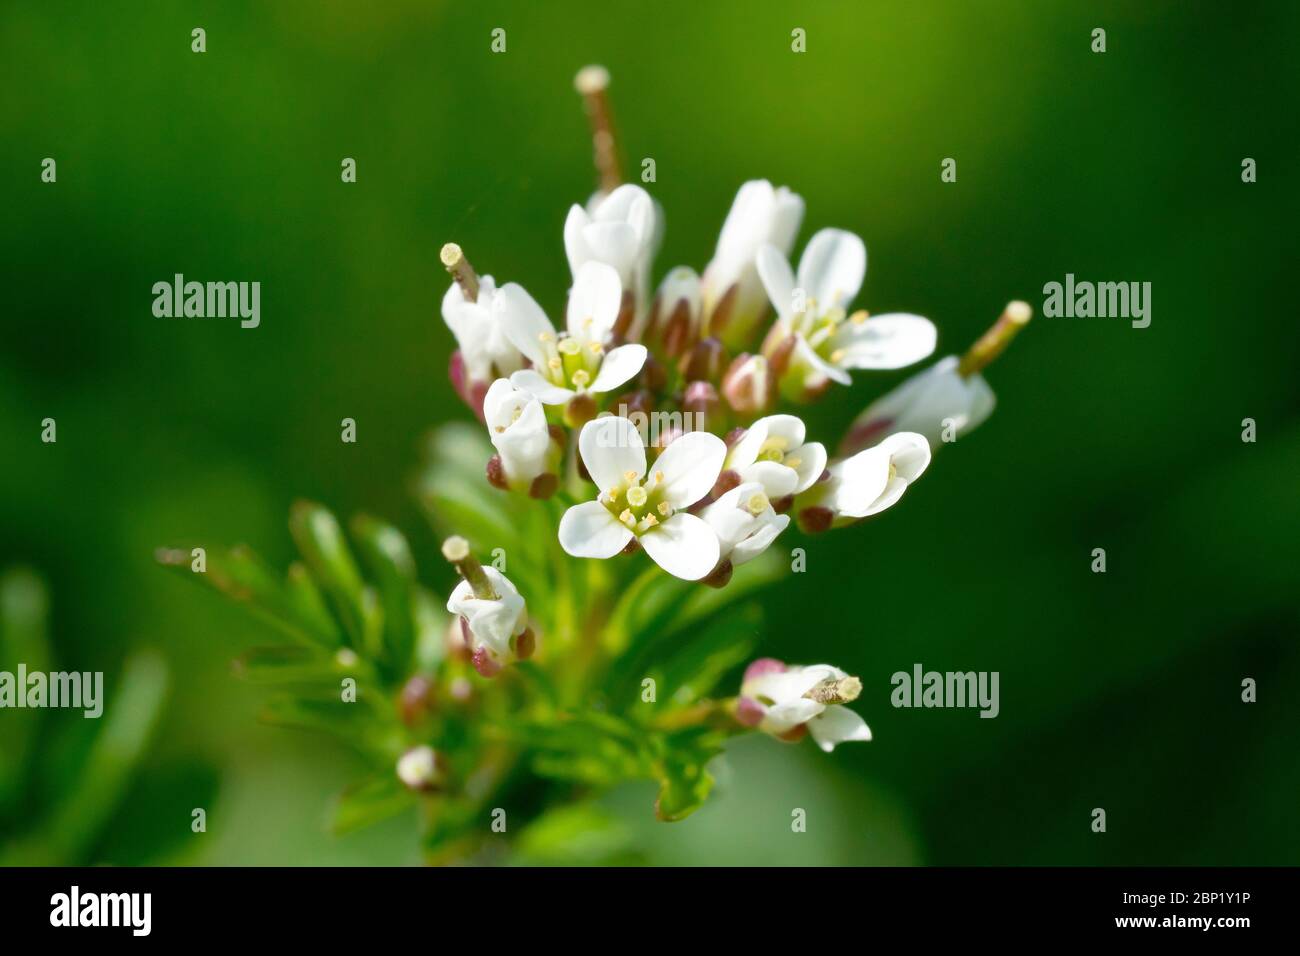 Wavy Bittercress (cardamine flexuosa), close up showing the head of tiny white flowers the plant produces, isolated against a plain green background. Stock Photo